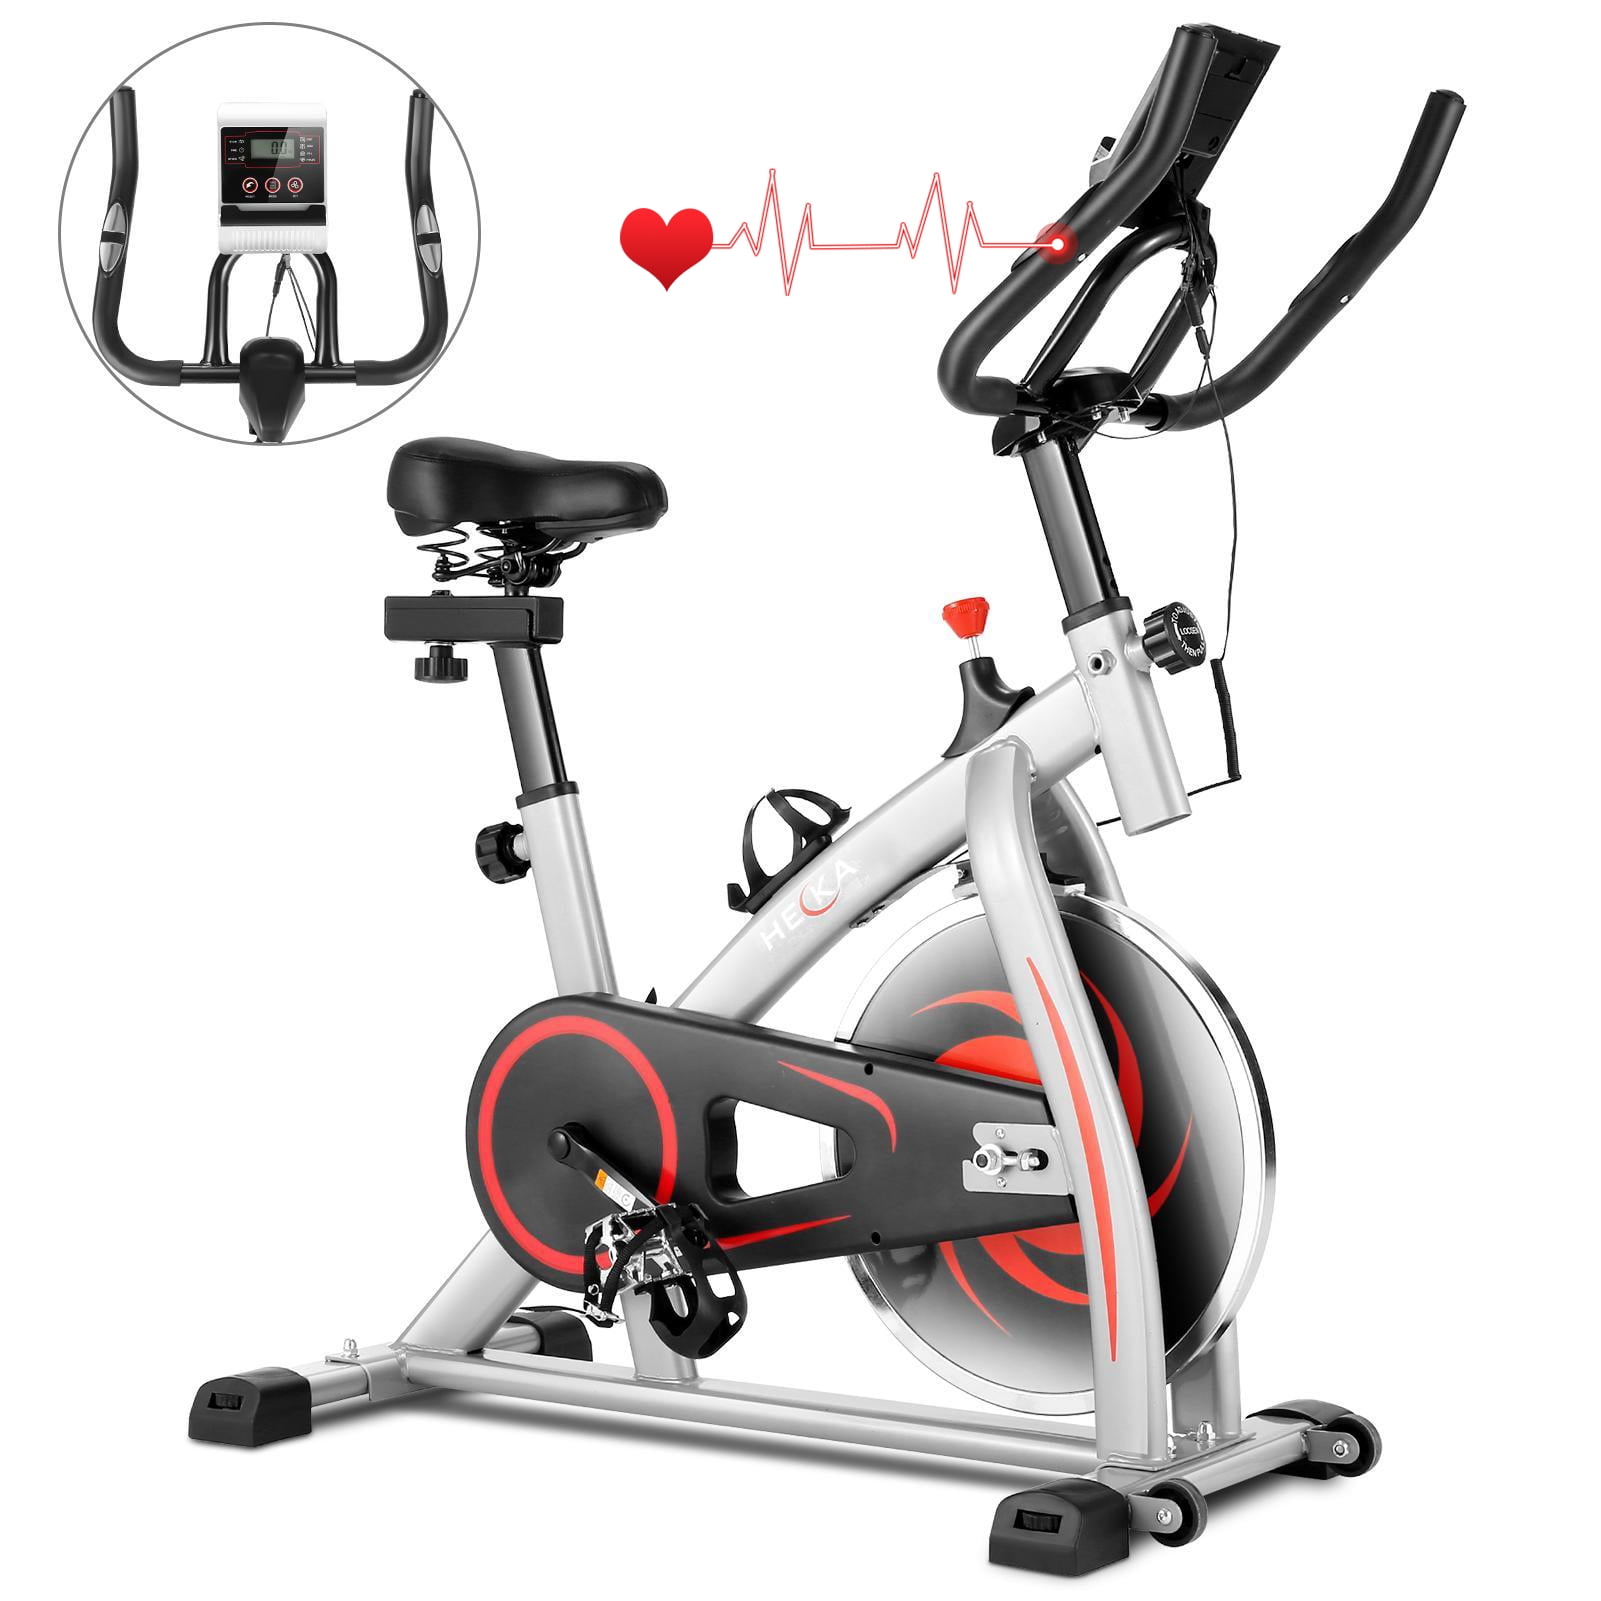 Details about   Stationary Exercise Bike Adjustable Bicycle Cardio Cycling Workout Machine Gym 